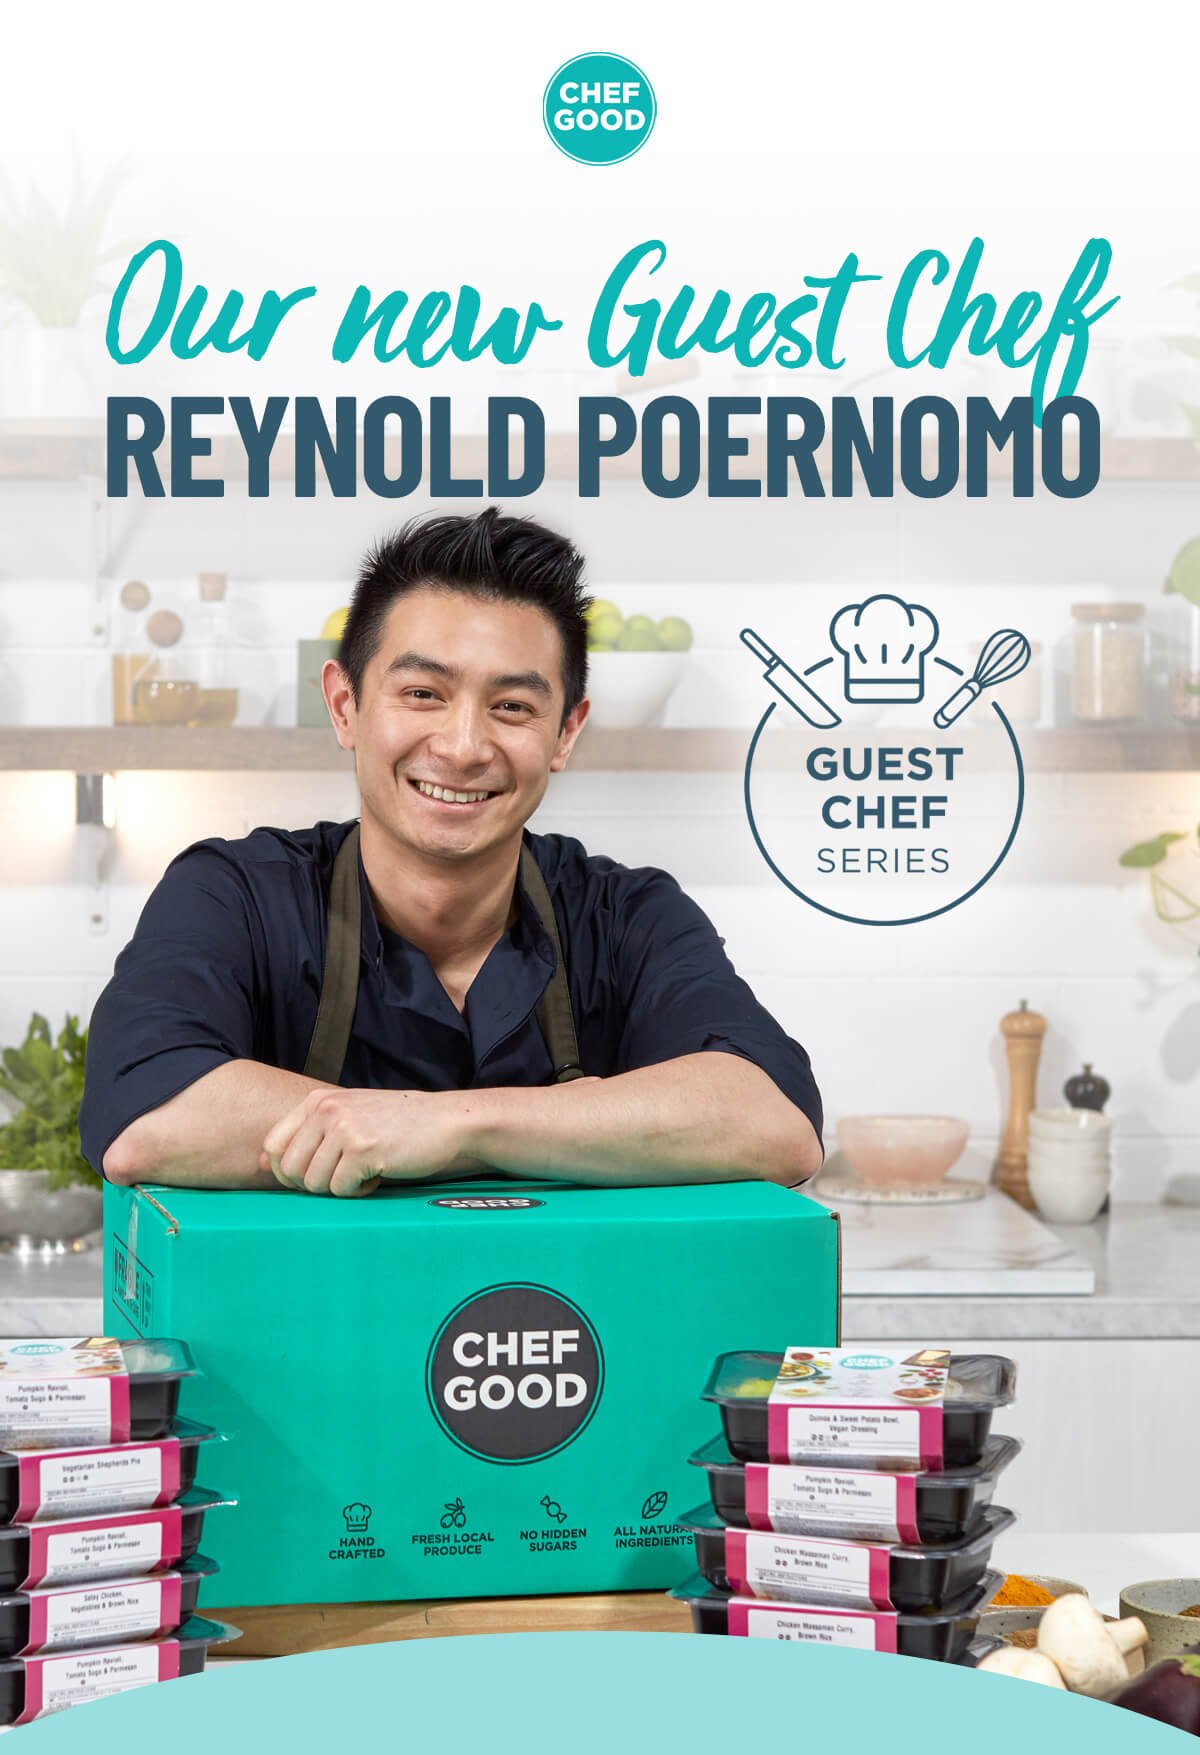 Get $50 off your first 2 Chefgood boxes